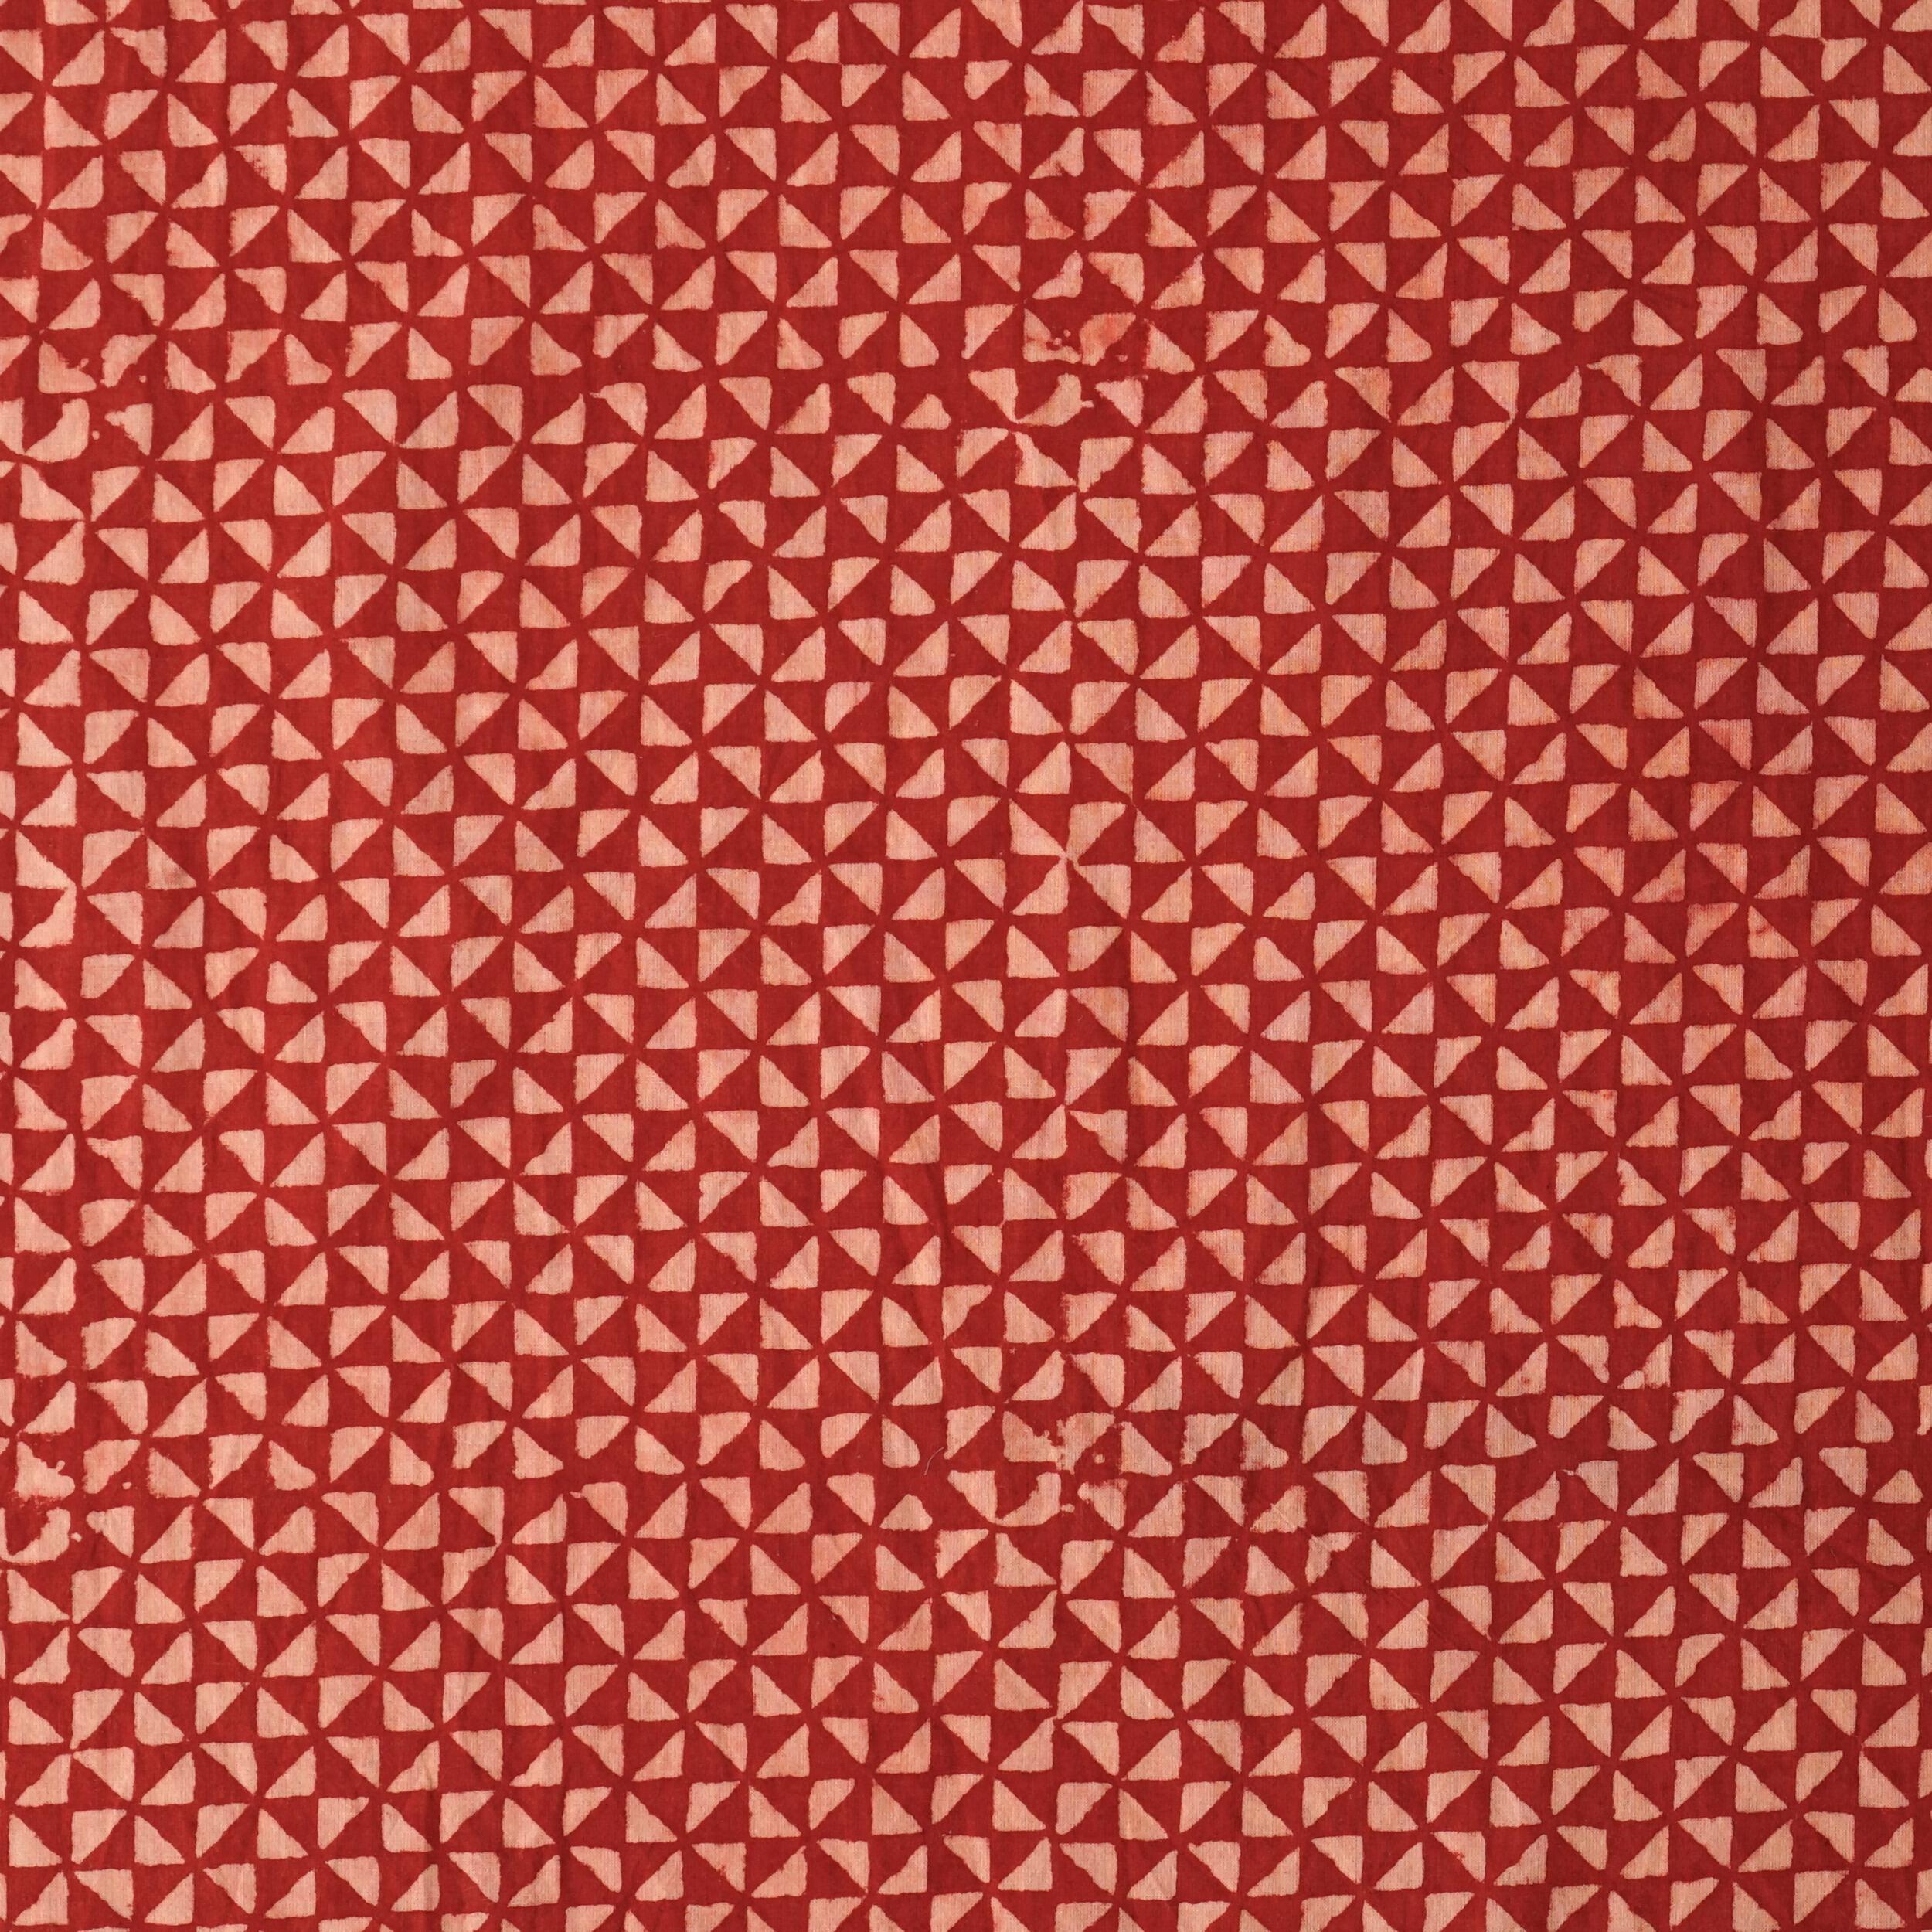 100% Block-Printed Cotton - Hourglass Print - Red & White - Flat